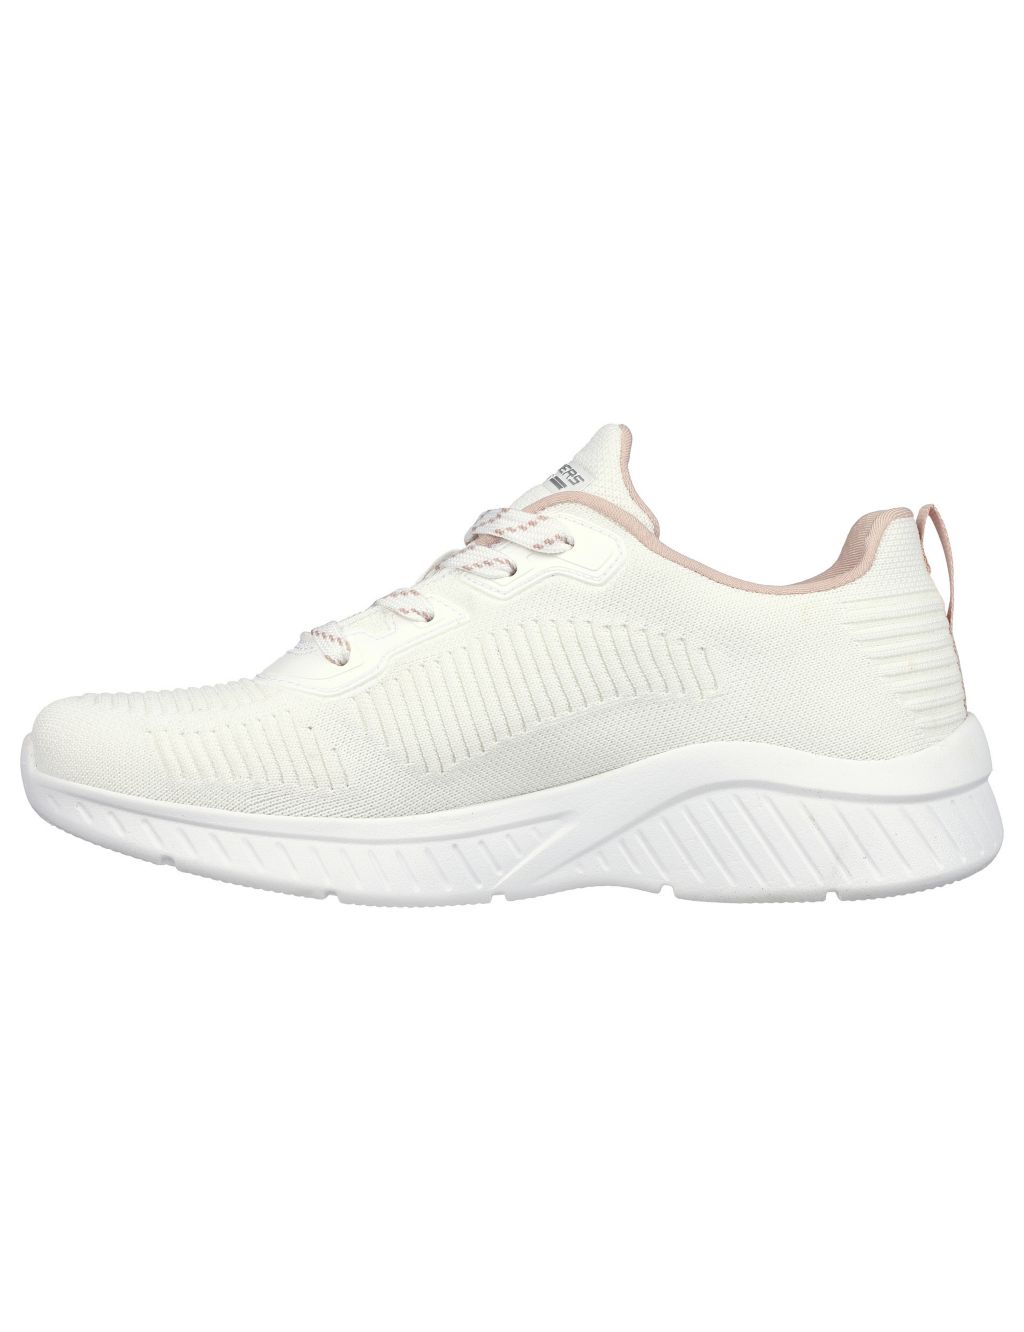 Squad Air Sweet Encounter Trainers | Skechers | M&S